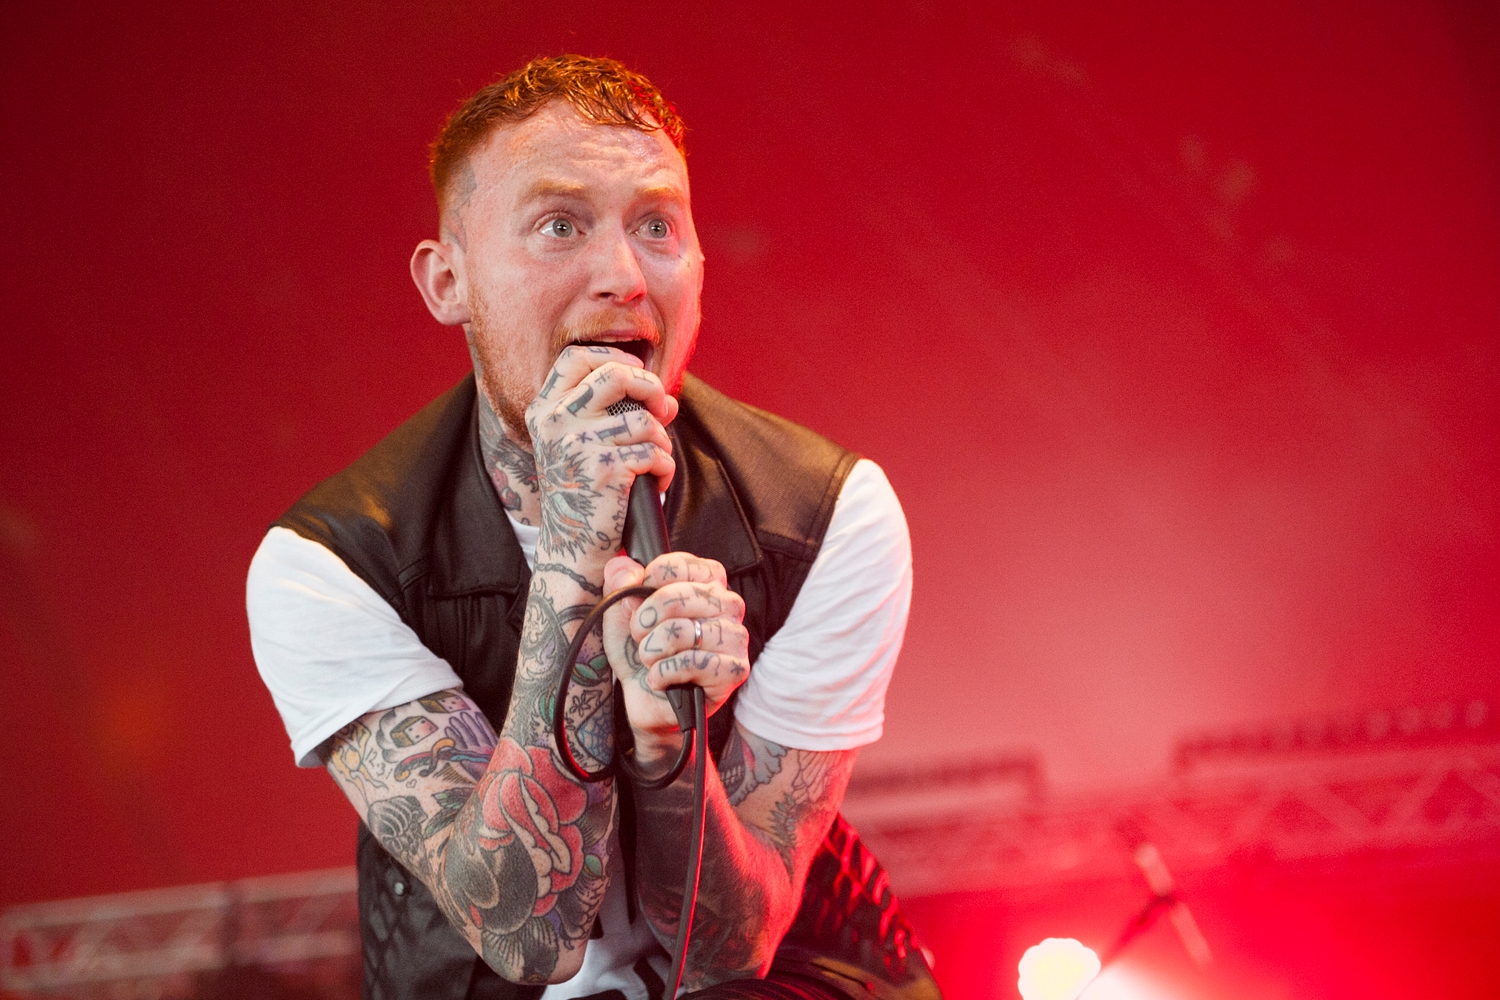 Frank Carter & The Rattlesnakes make it a family affair at Reading 2015